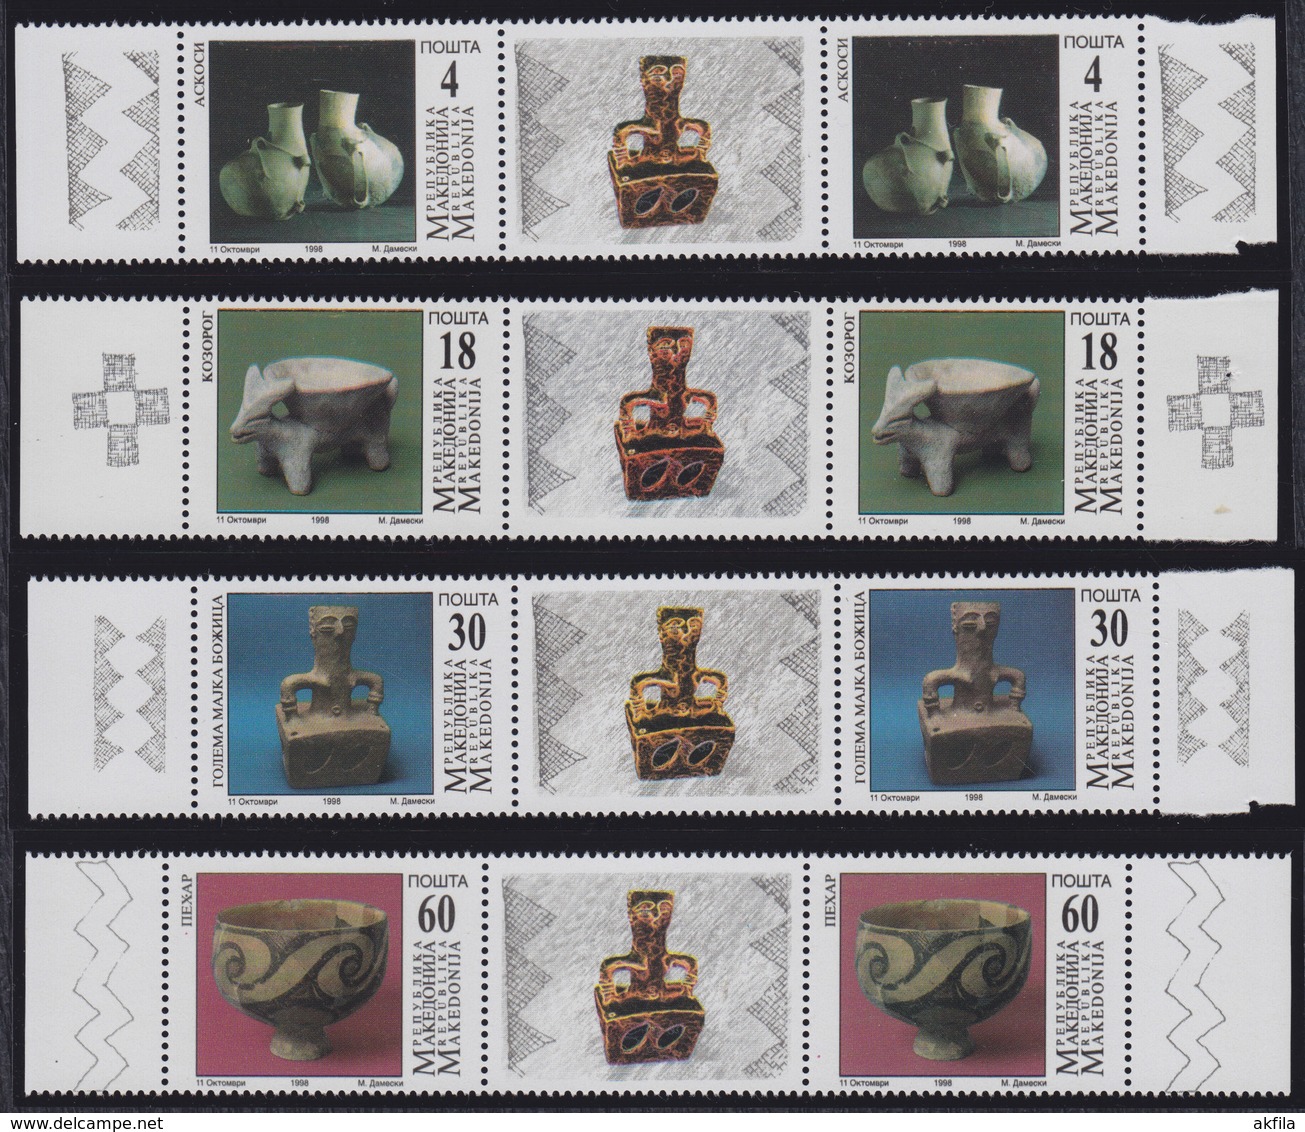 Macedonia 1998 Archaeological Findings From Neolithic Times, Stamp-vignette-stamp, MNH (**) Michel 122-125 - Macédoine Du Nord